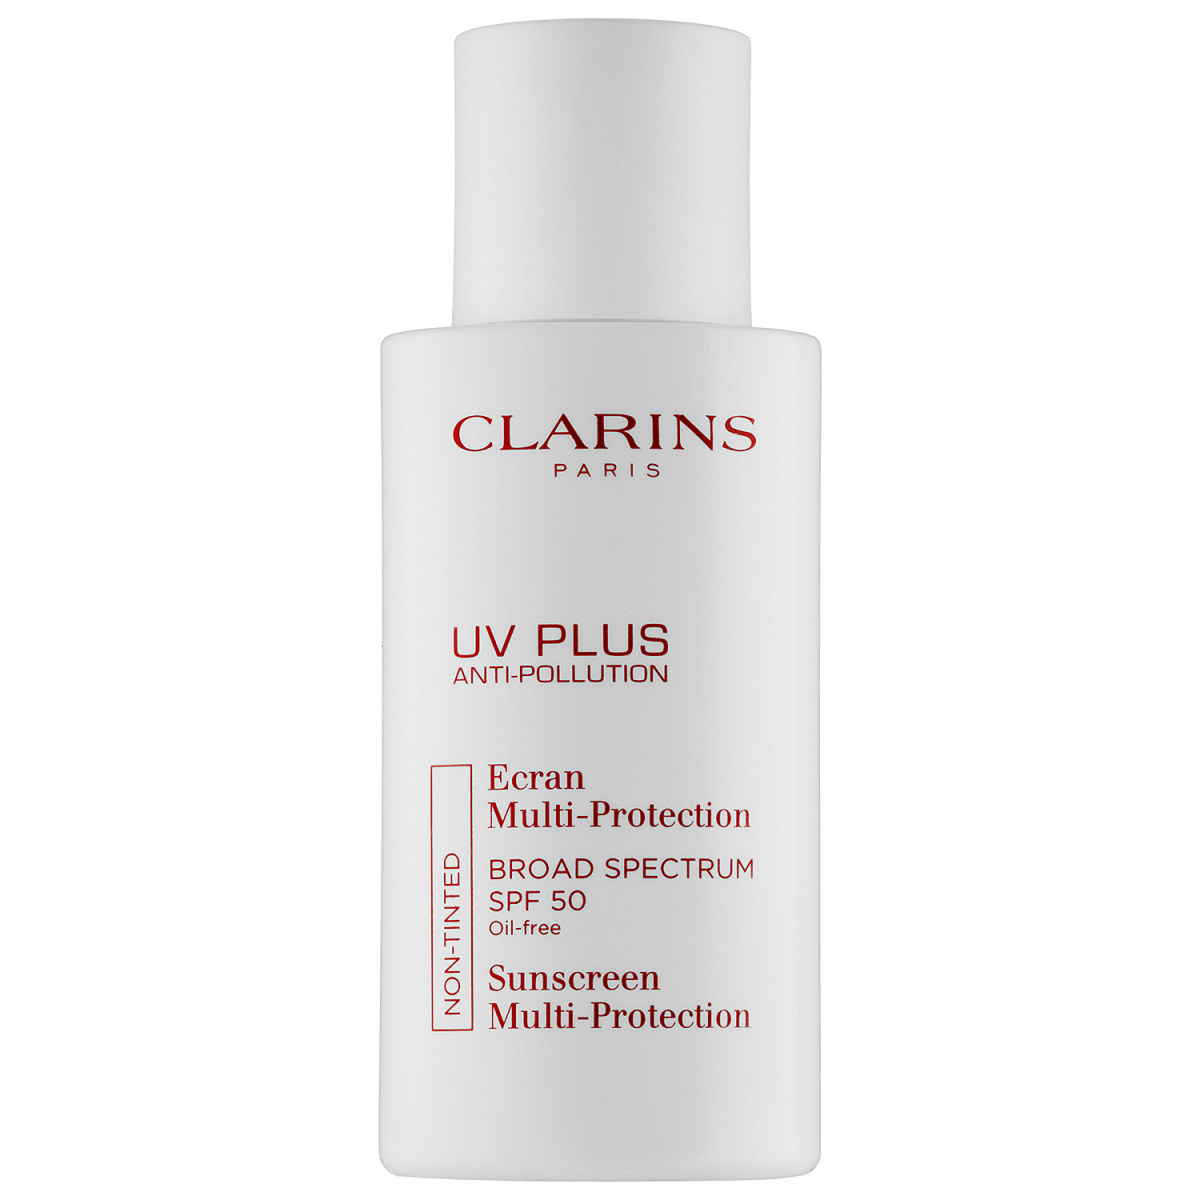 Clarins multi-protection broad spectrum sunscreen SPF 50, $43, available at Sephora.